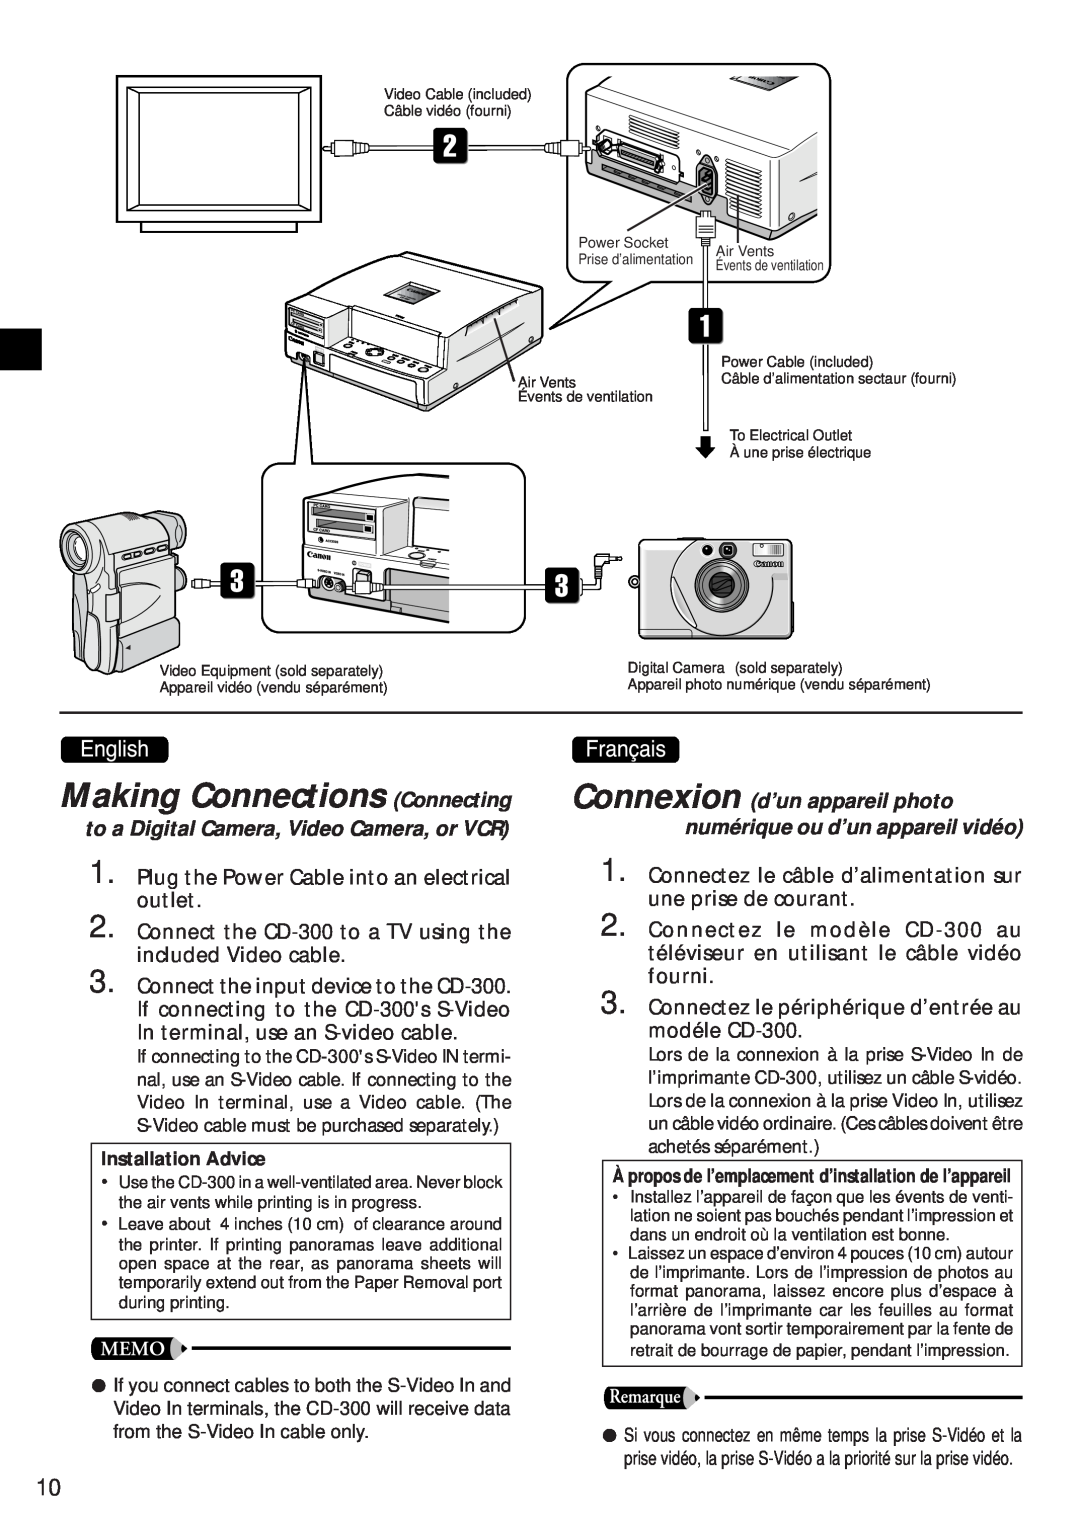 Canon CD-300 manual Making Connections Connecting, to a Digital Camera, Video Camera, or VCR, Installation Advice 